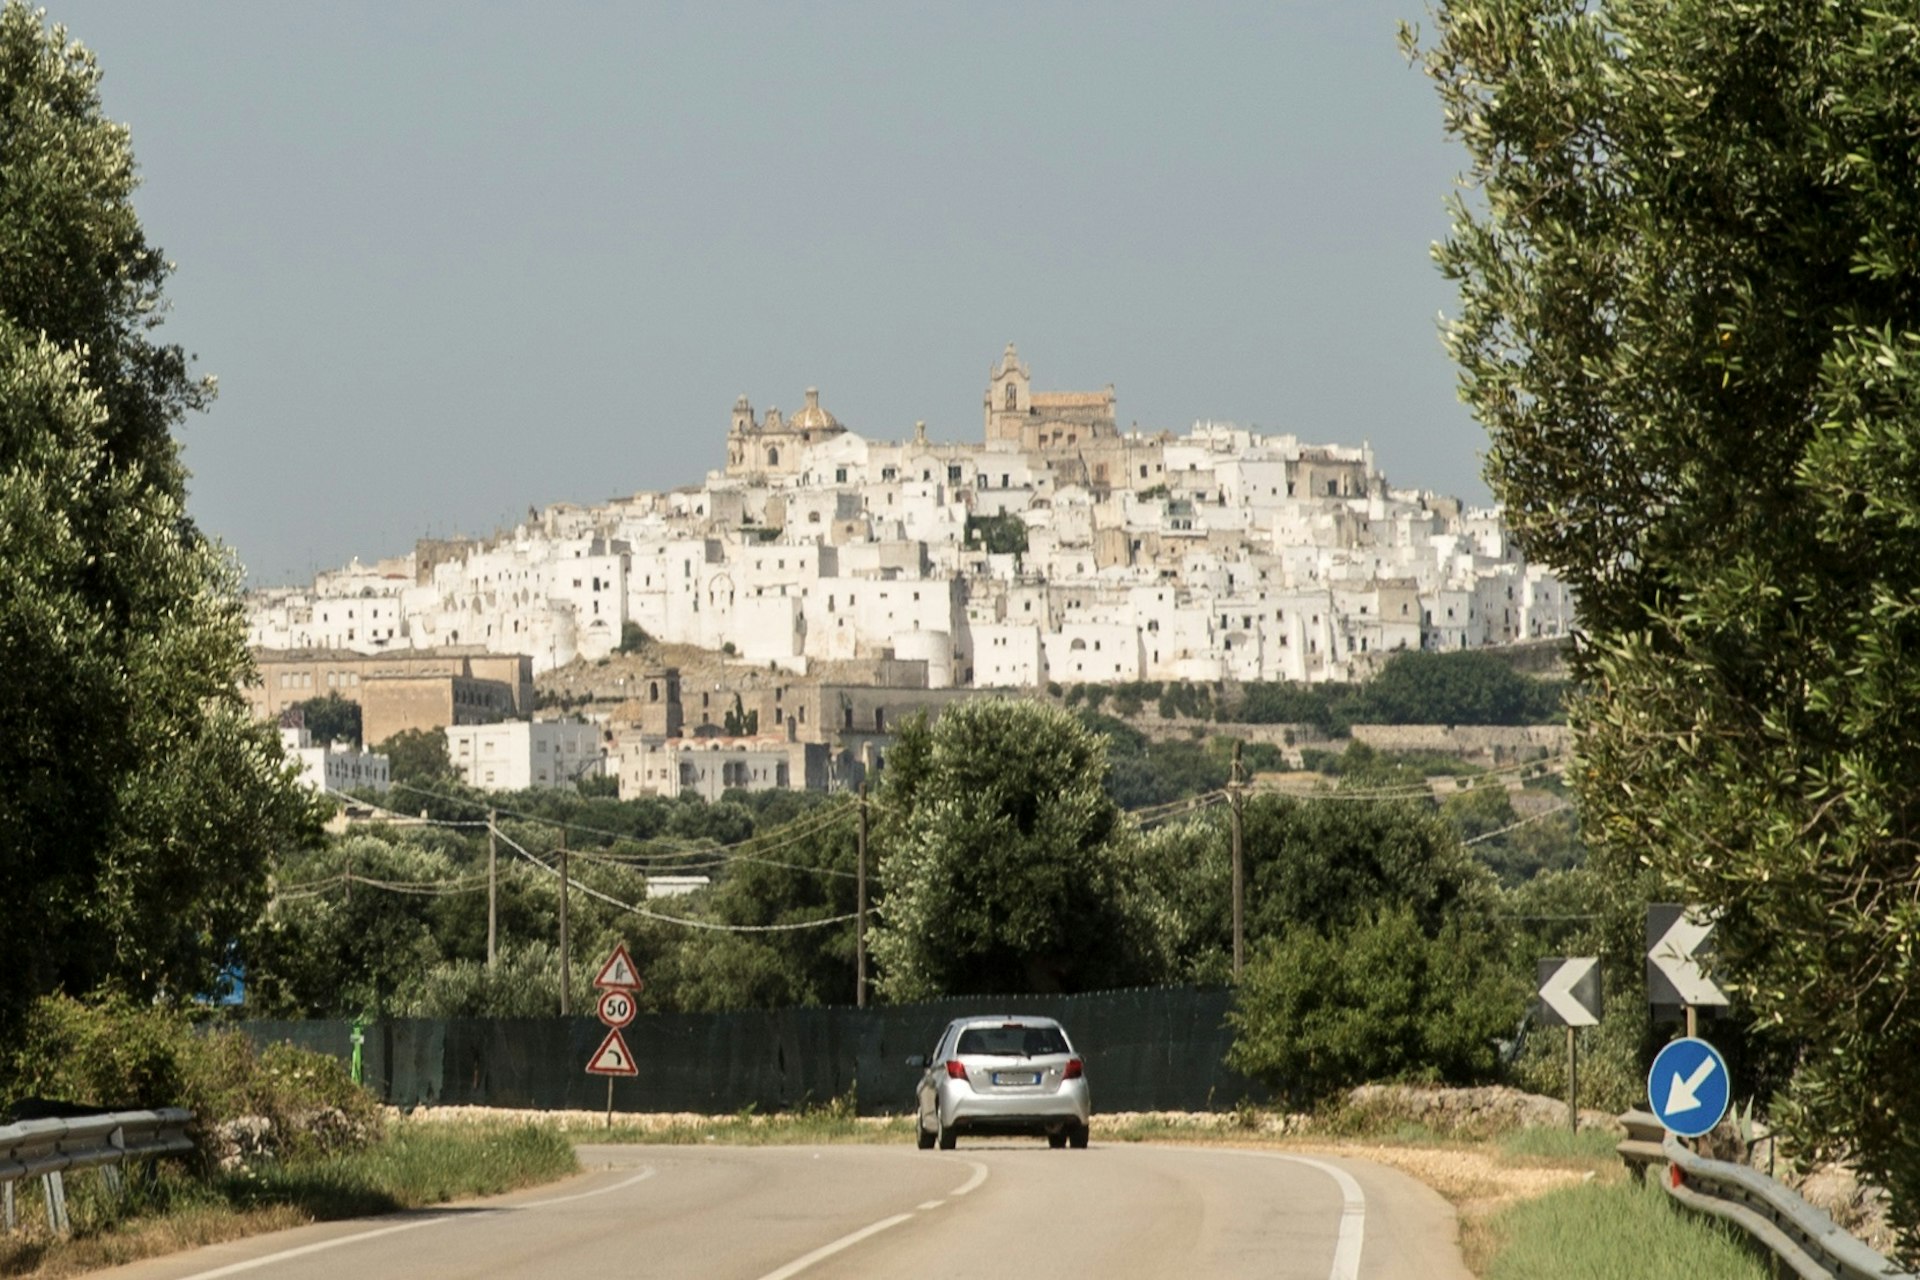 A car on a road with the hilltop town visible in the background, Ostini, Puglia, Italy